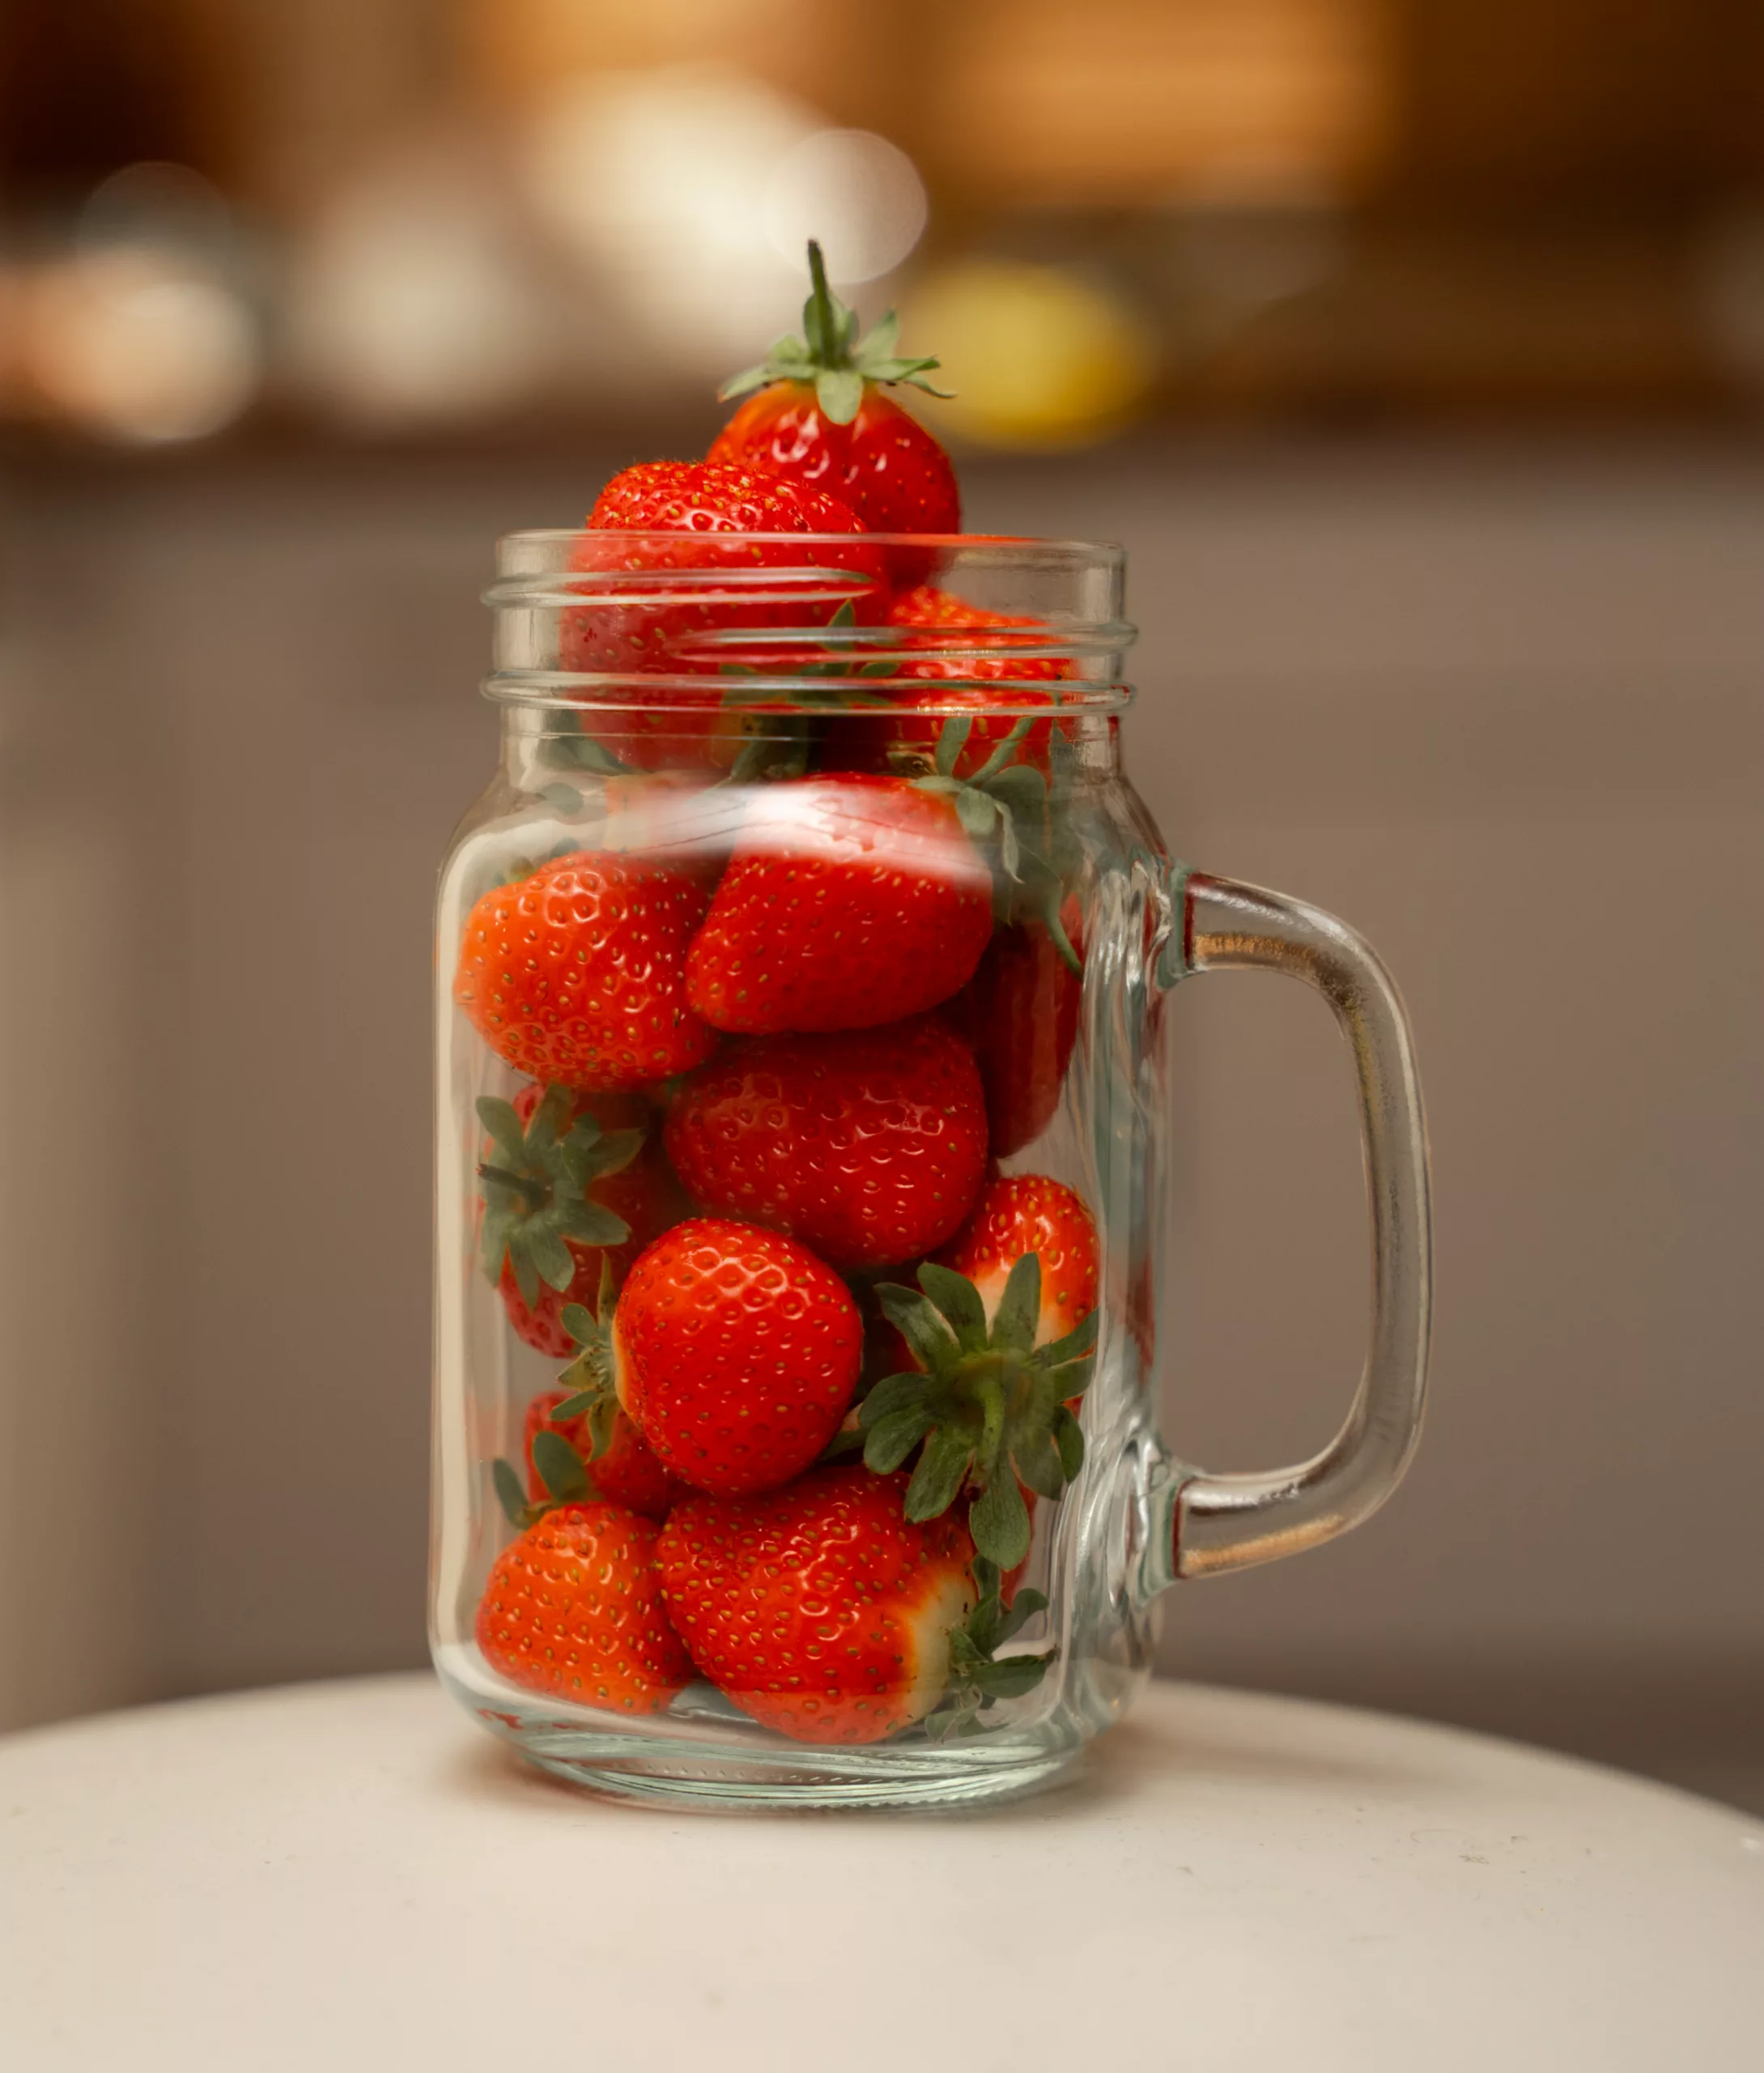 6 Mistakes to Avoid When Storing Strawberries in Mason Jars